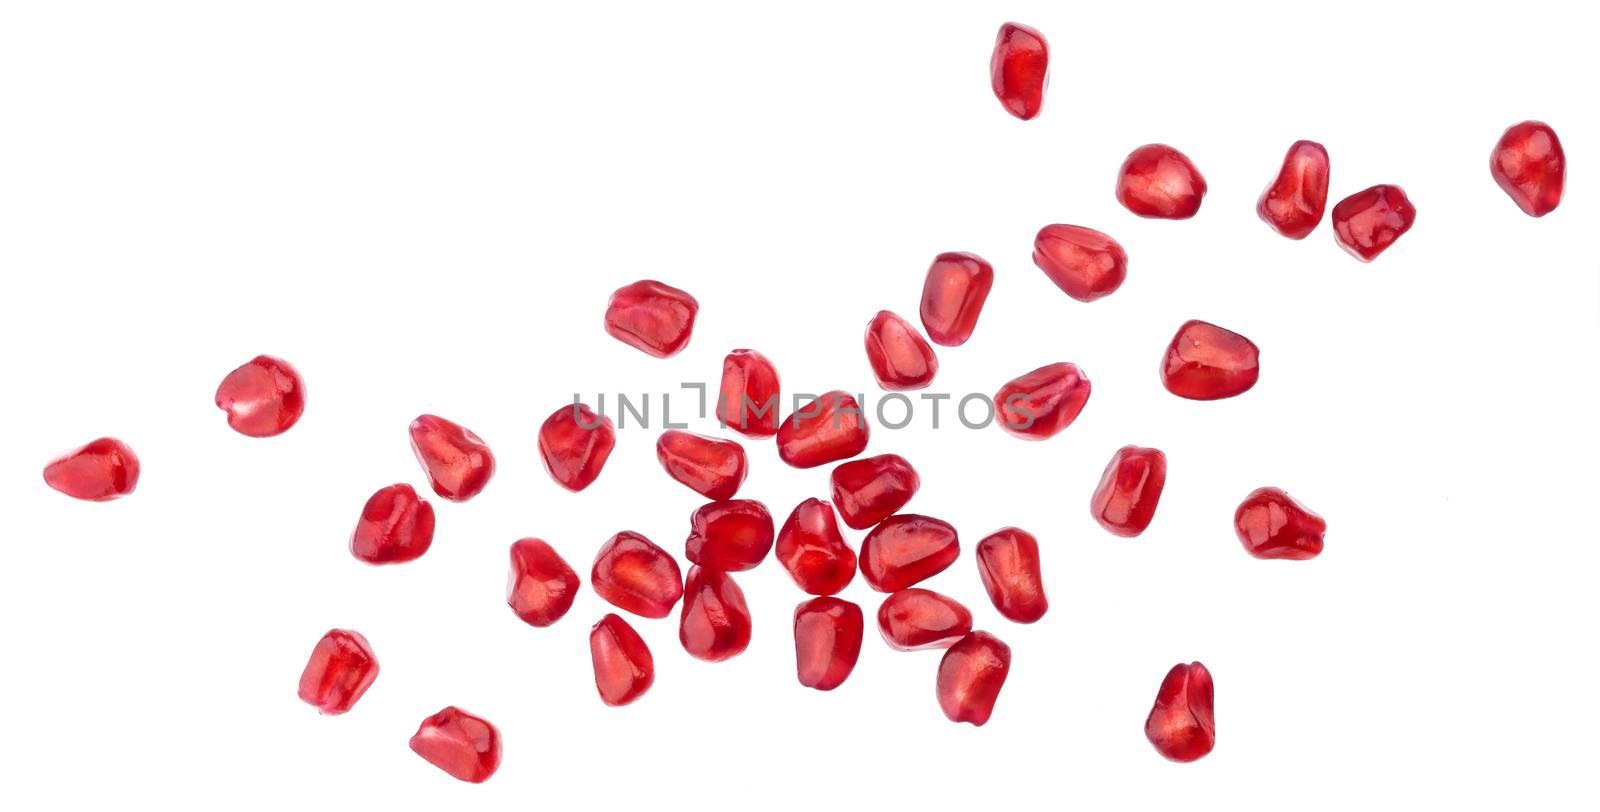 Pomegranate seeds isolated on white background with clipping path, top view